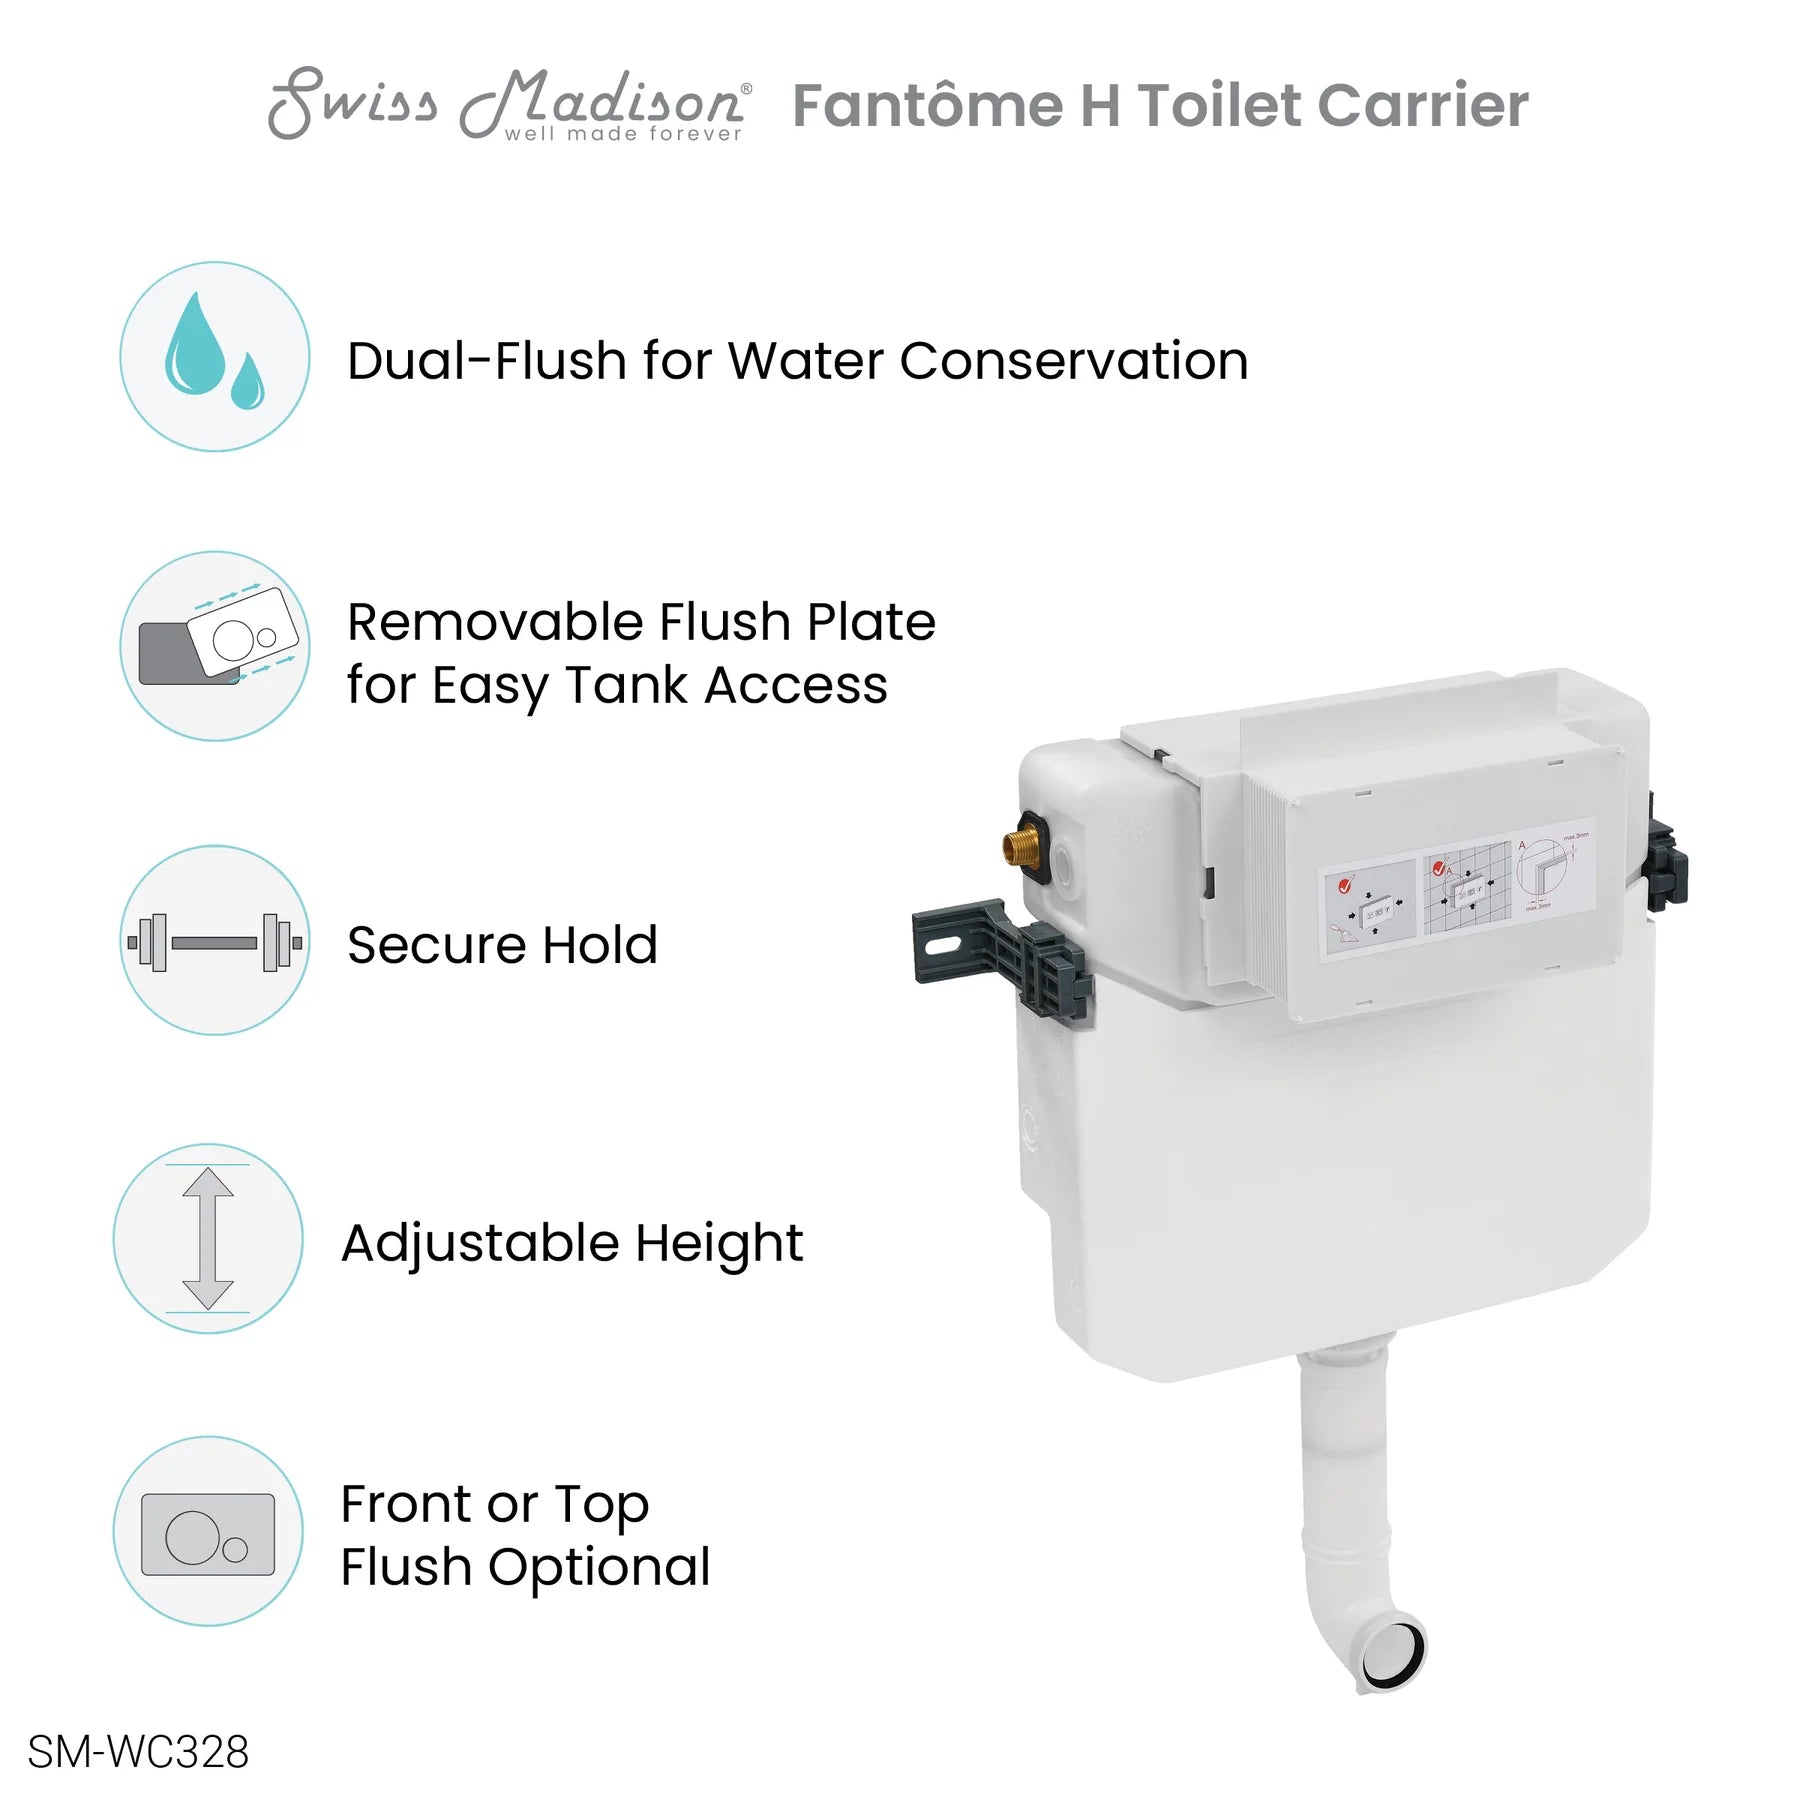 Swiss Madison Fantôme H Concealed Toilet Tank Carrier System with Top Flush for Back-to-Wall Toilet - SM-WC328